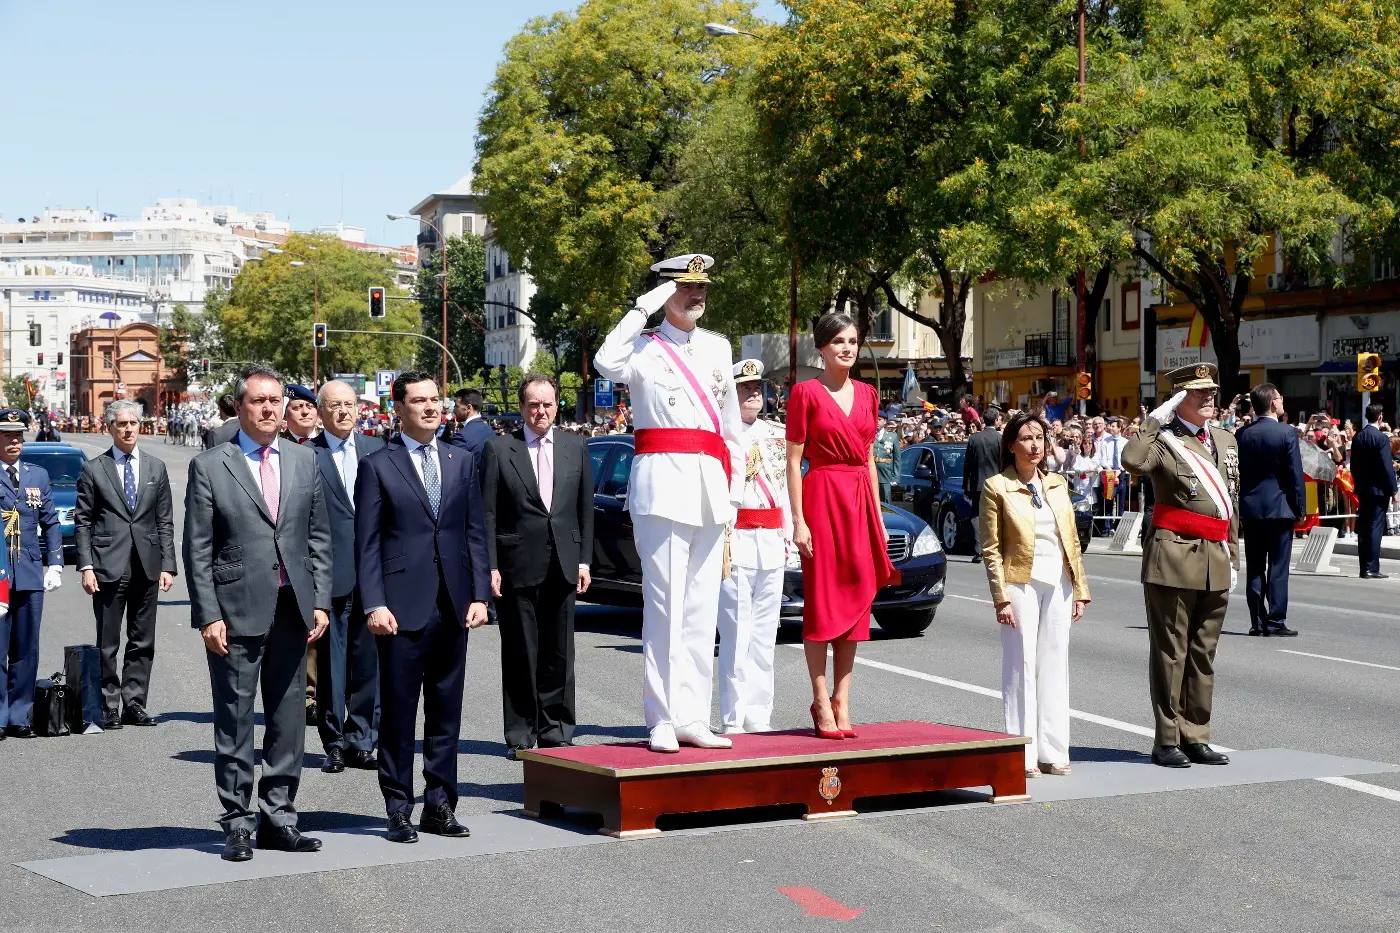 Queen Letizia in red outfit for Armed Forces day